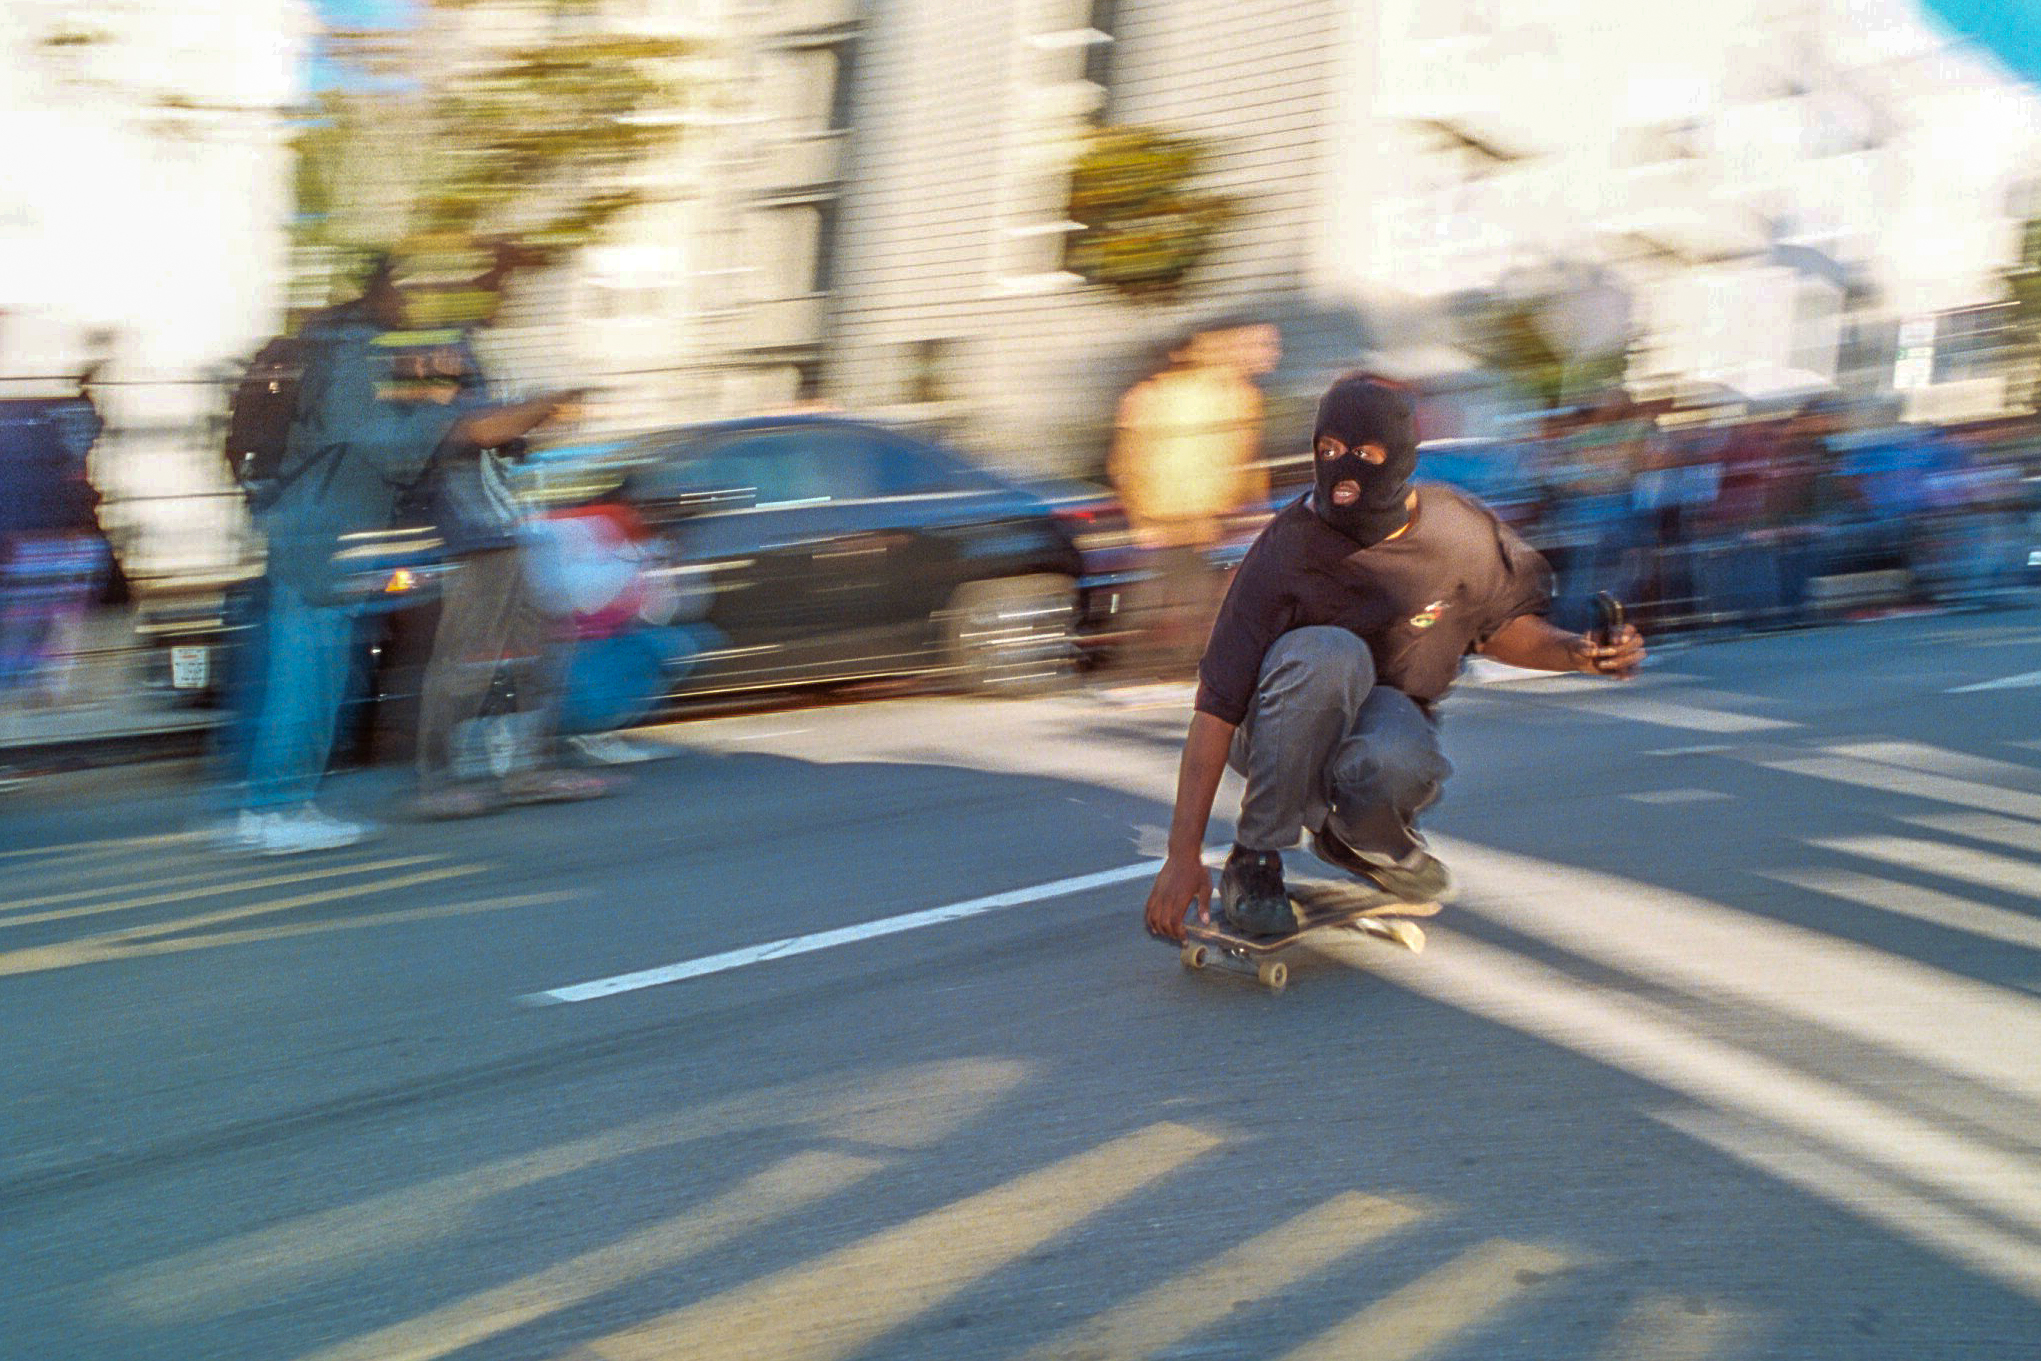 A person in a ski mask speeds on a skateboard on a bustling street.